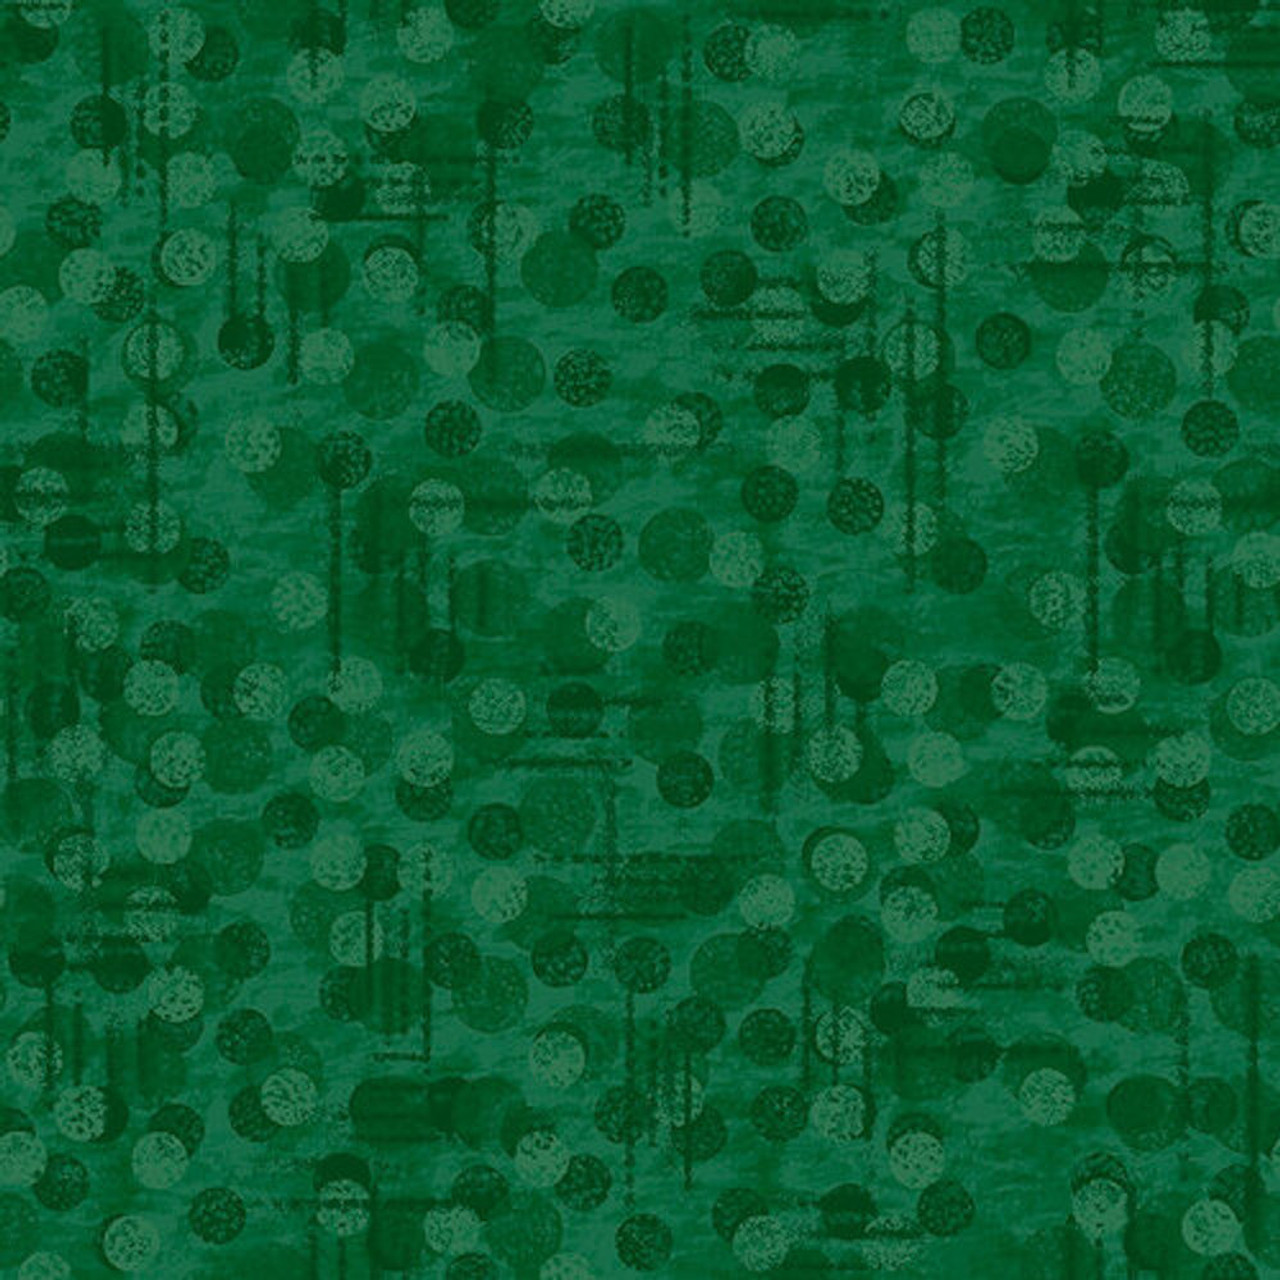 Blank Quilting Jot Dot Tonal Texture Green Cotton Fabric By The Yard